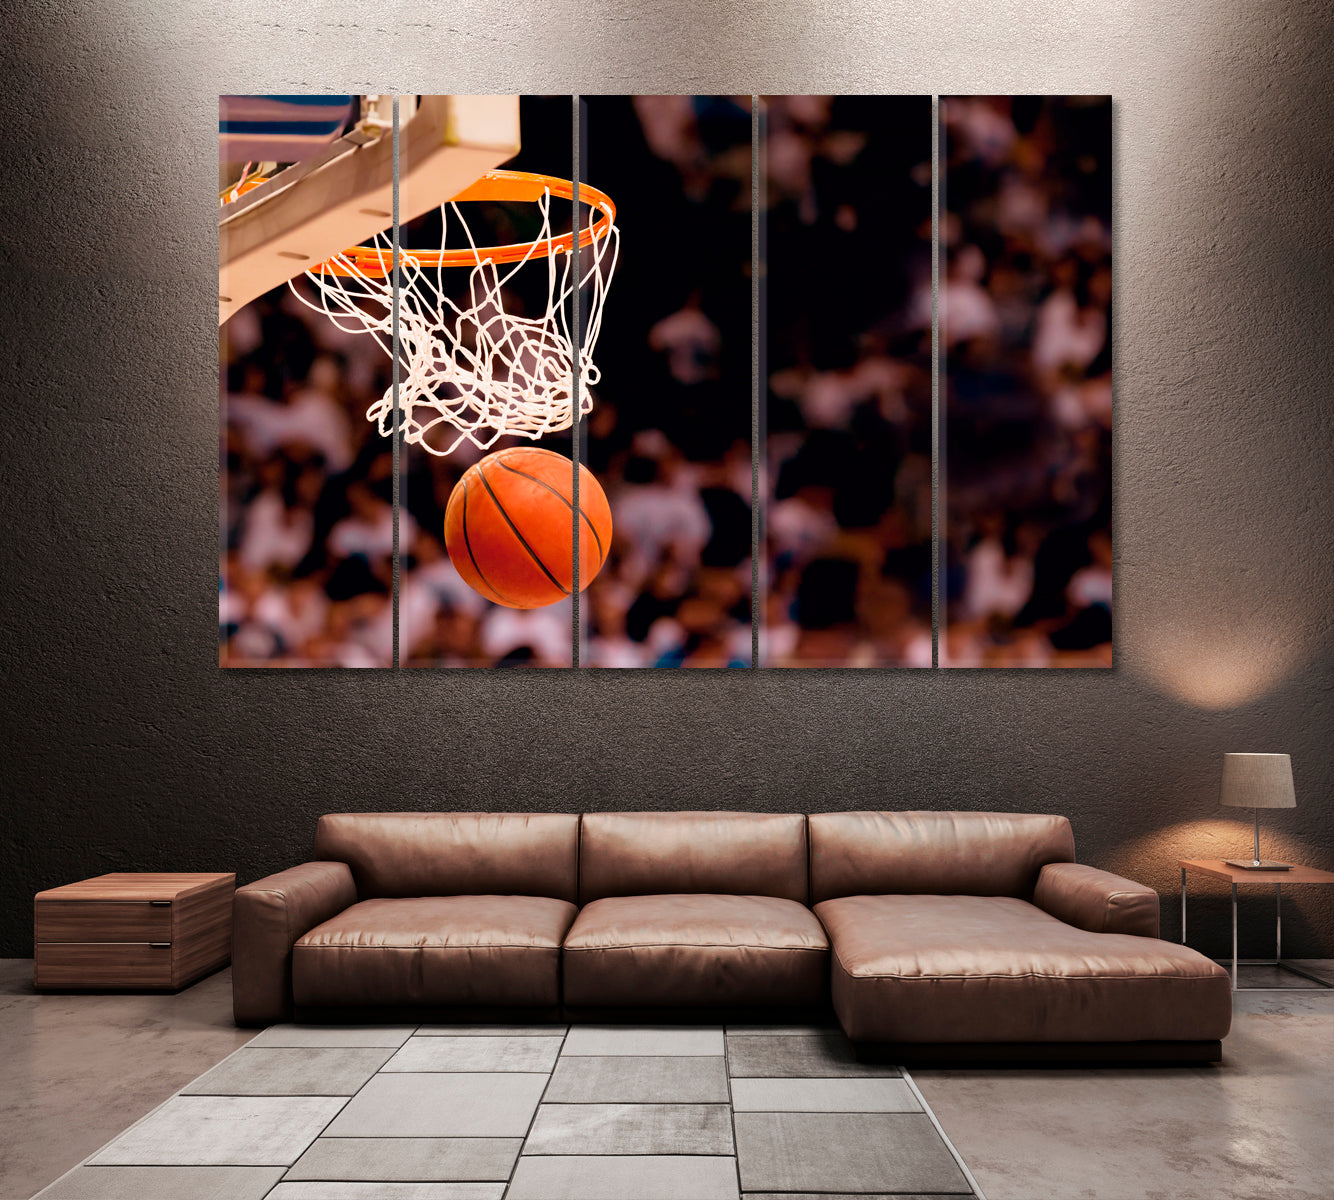 Basketball Hoop Canvas Print ArtLexy 5 Panels 36"x24" inches 